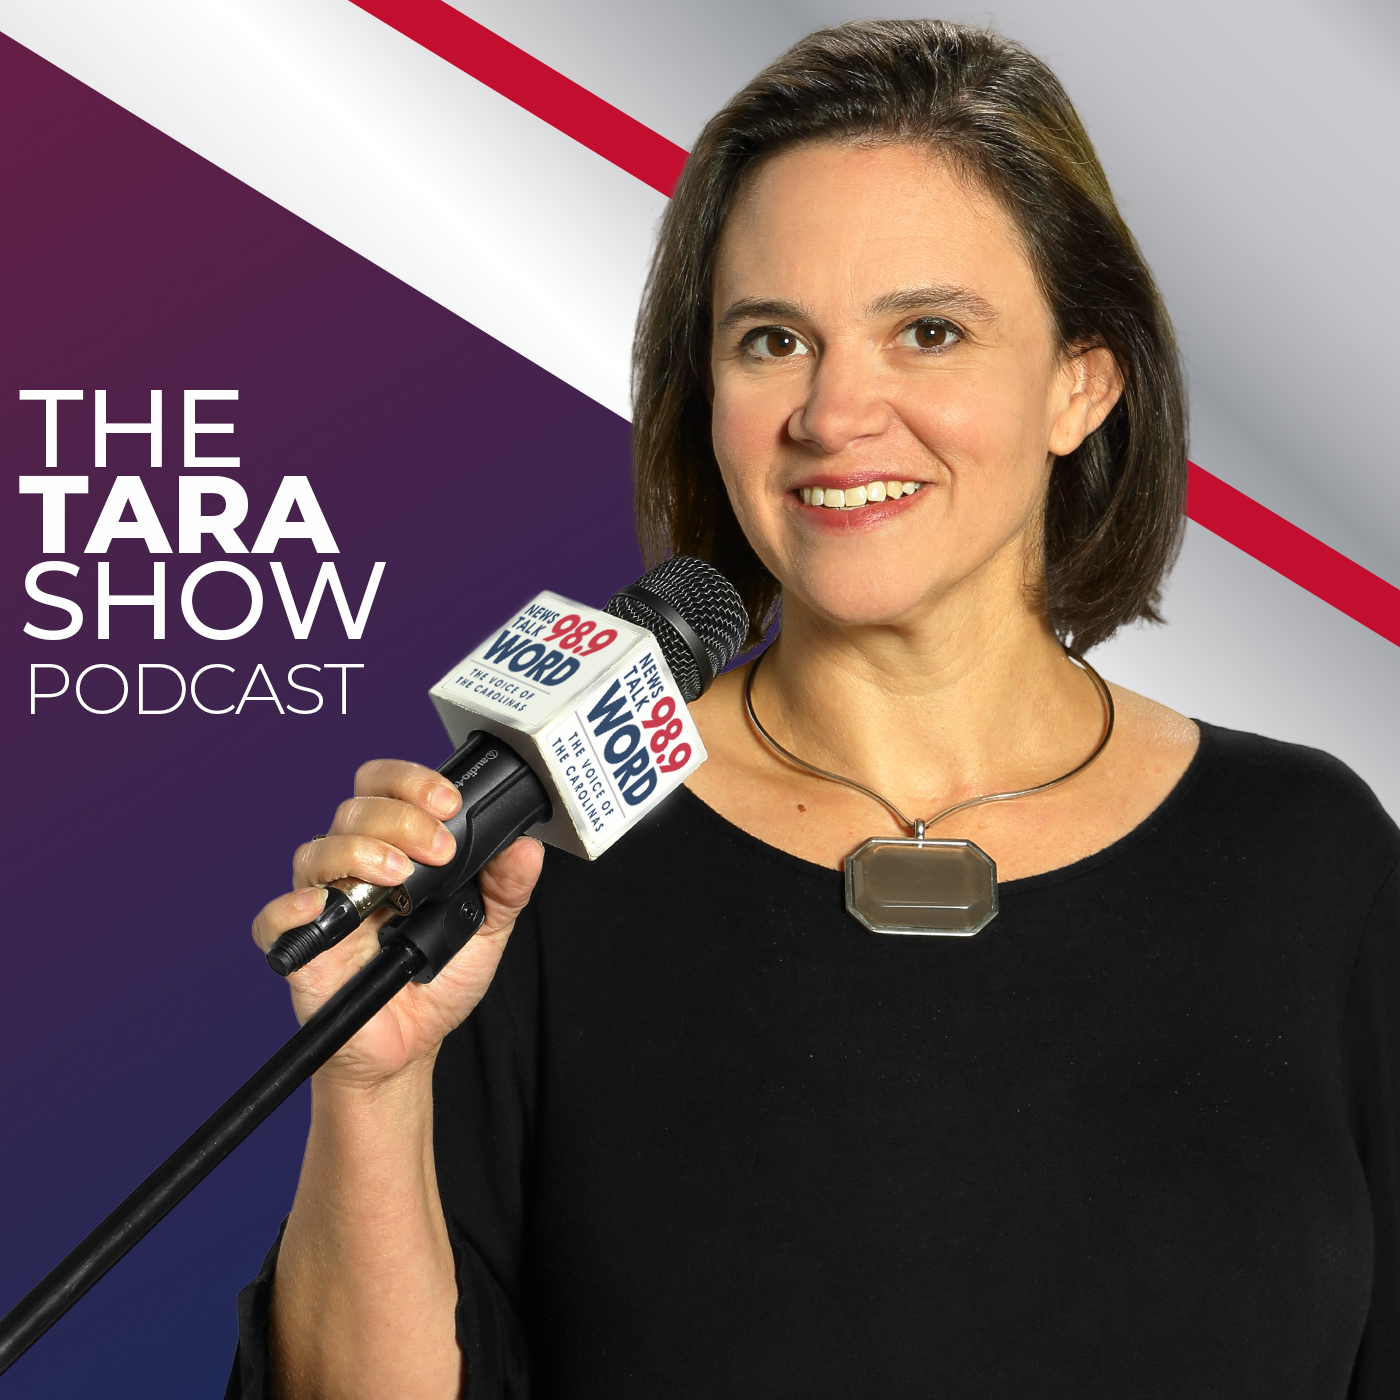 Hour 2: The Tara Show - “Biden’s Comments on Trump’s Immunity” “America’s Gangsta Paradise” “The Greatest Power of the Democrats” “Text Line Responds” 